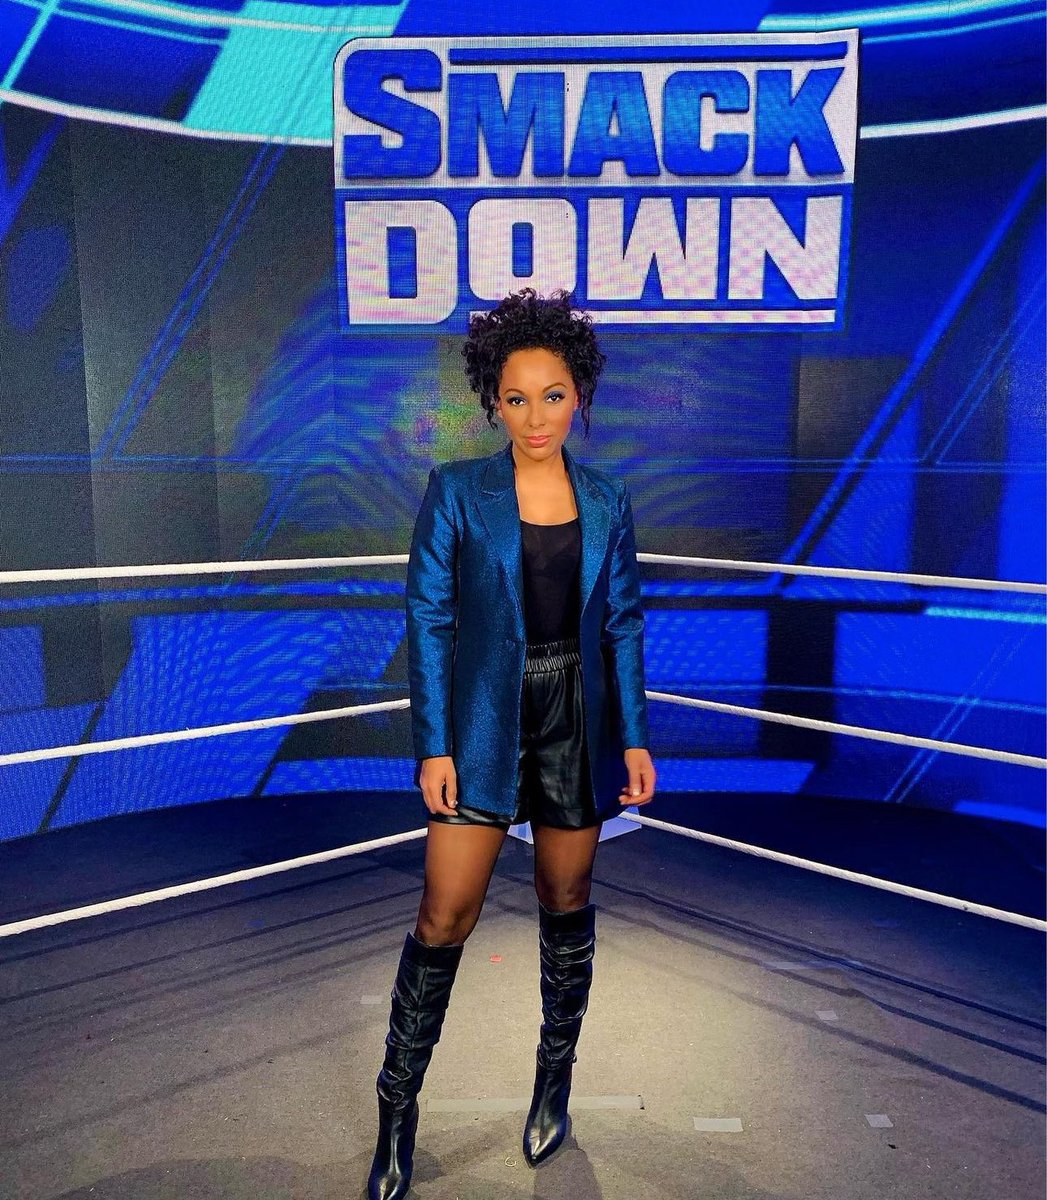 Shawn Michaels confirms that Alicia Taylor will officially be the new ring announcer for #SmackDown.